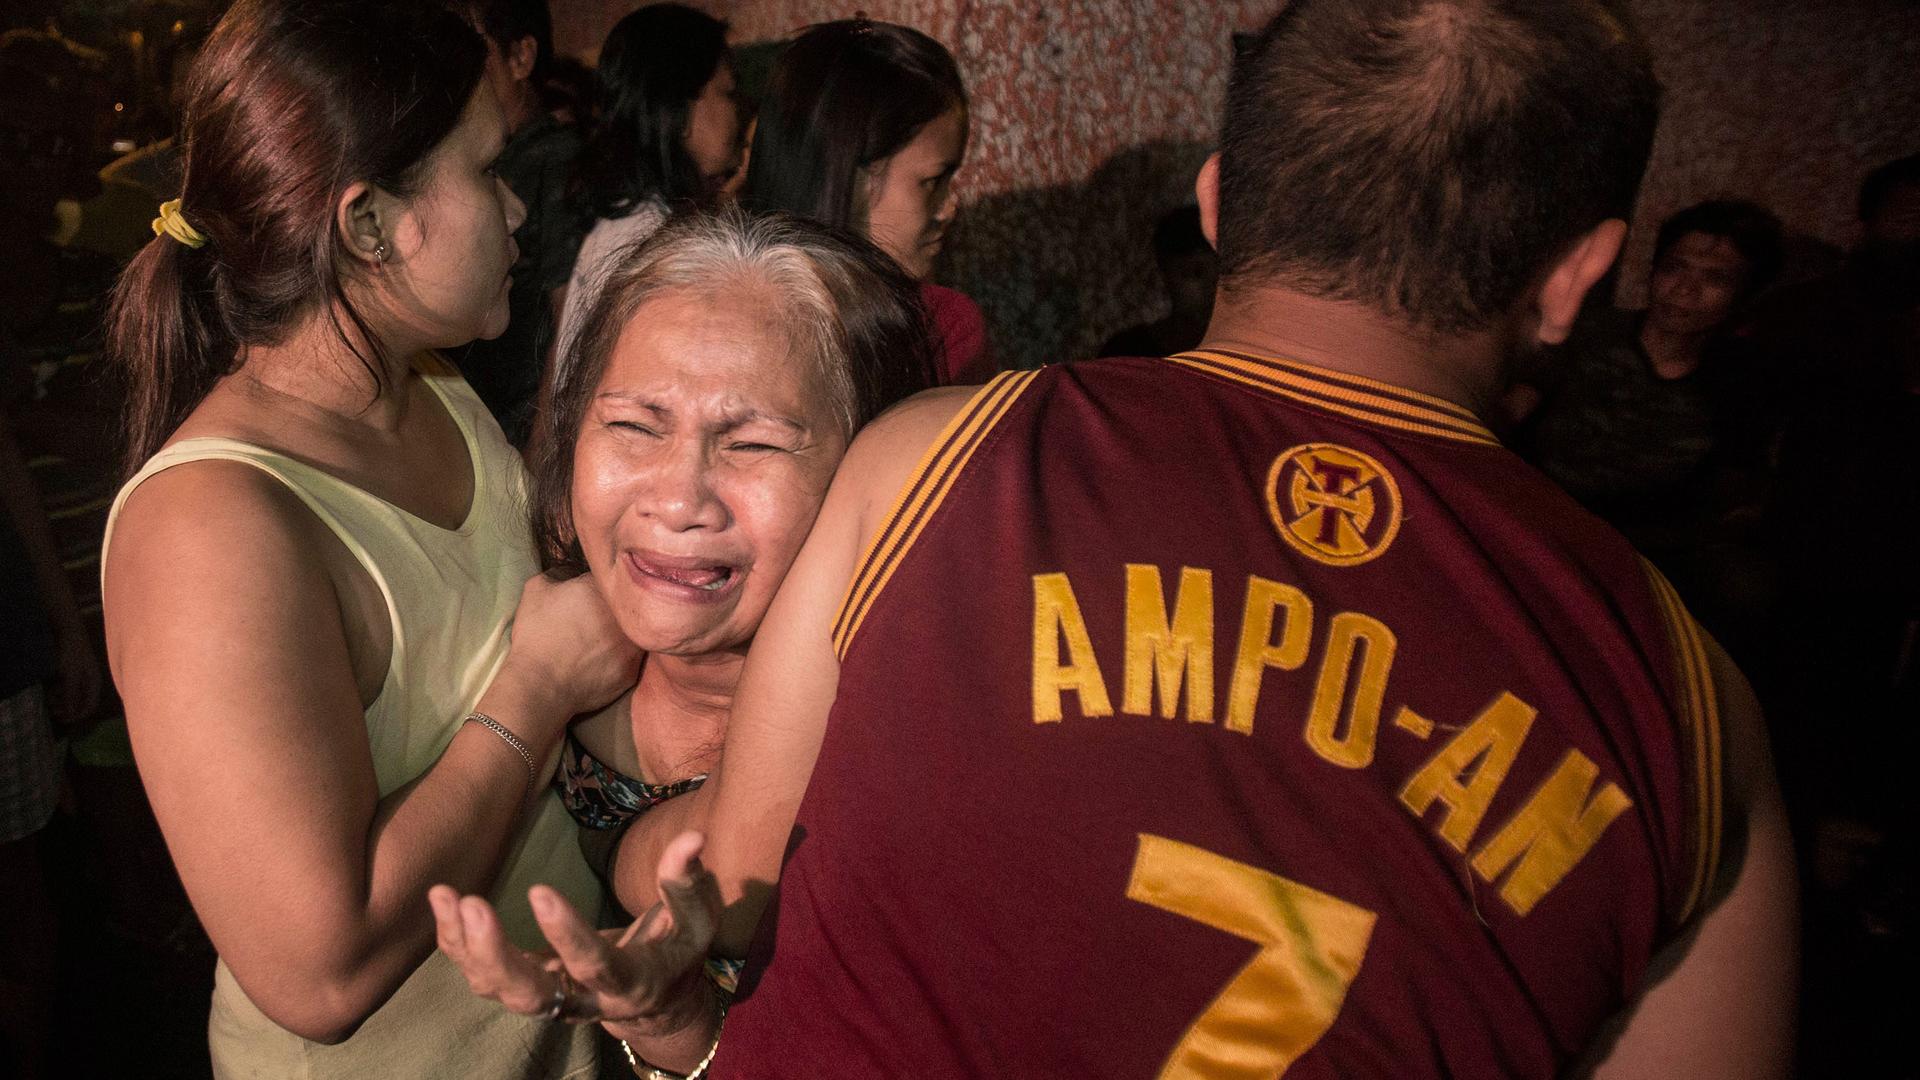 Yolanda Ampoan is hugged by her children after learning of the death of her son Sandrex Ampo. Ampo was killed by unknown assailant on September 23, 2016 in Punta Sta Ana, Manila.